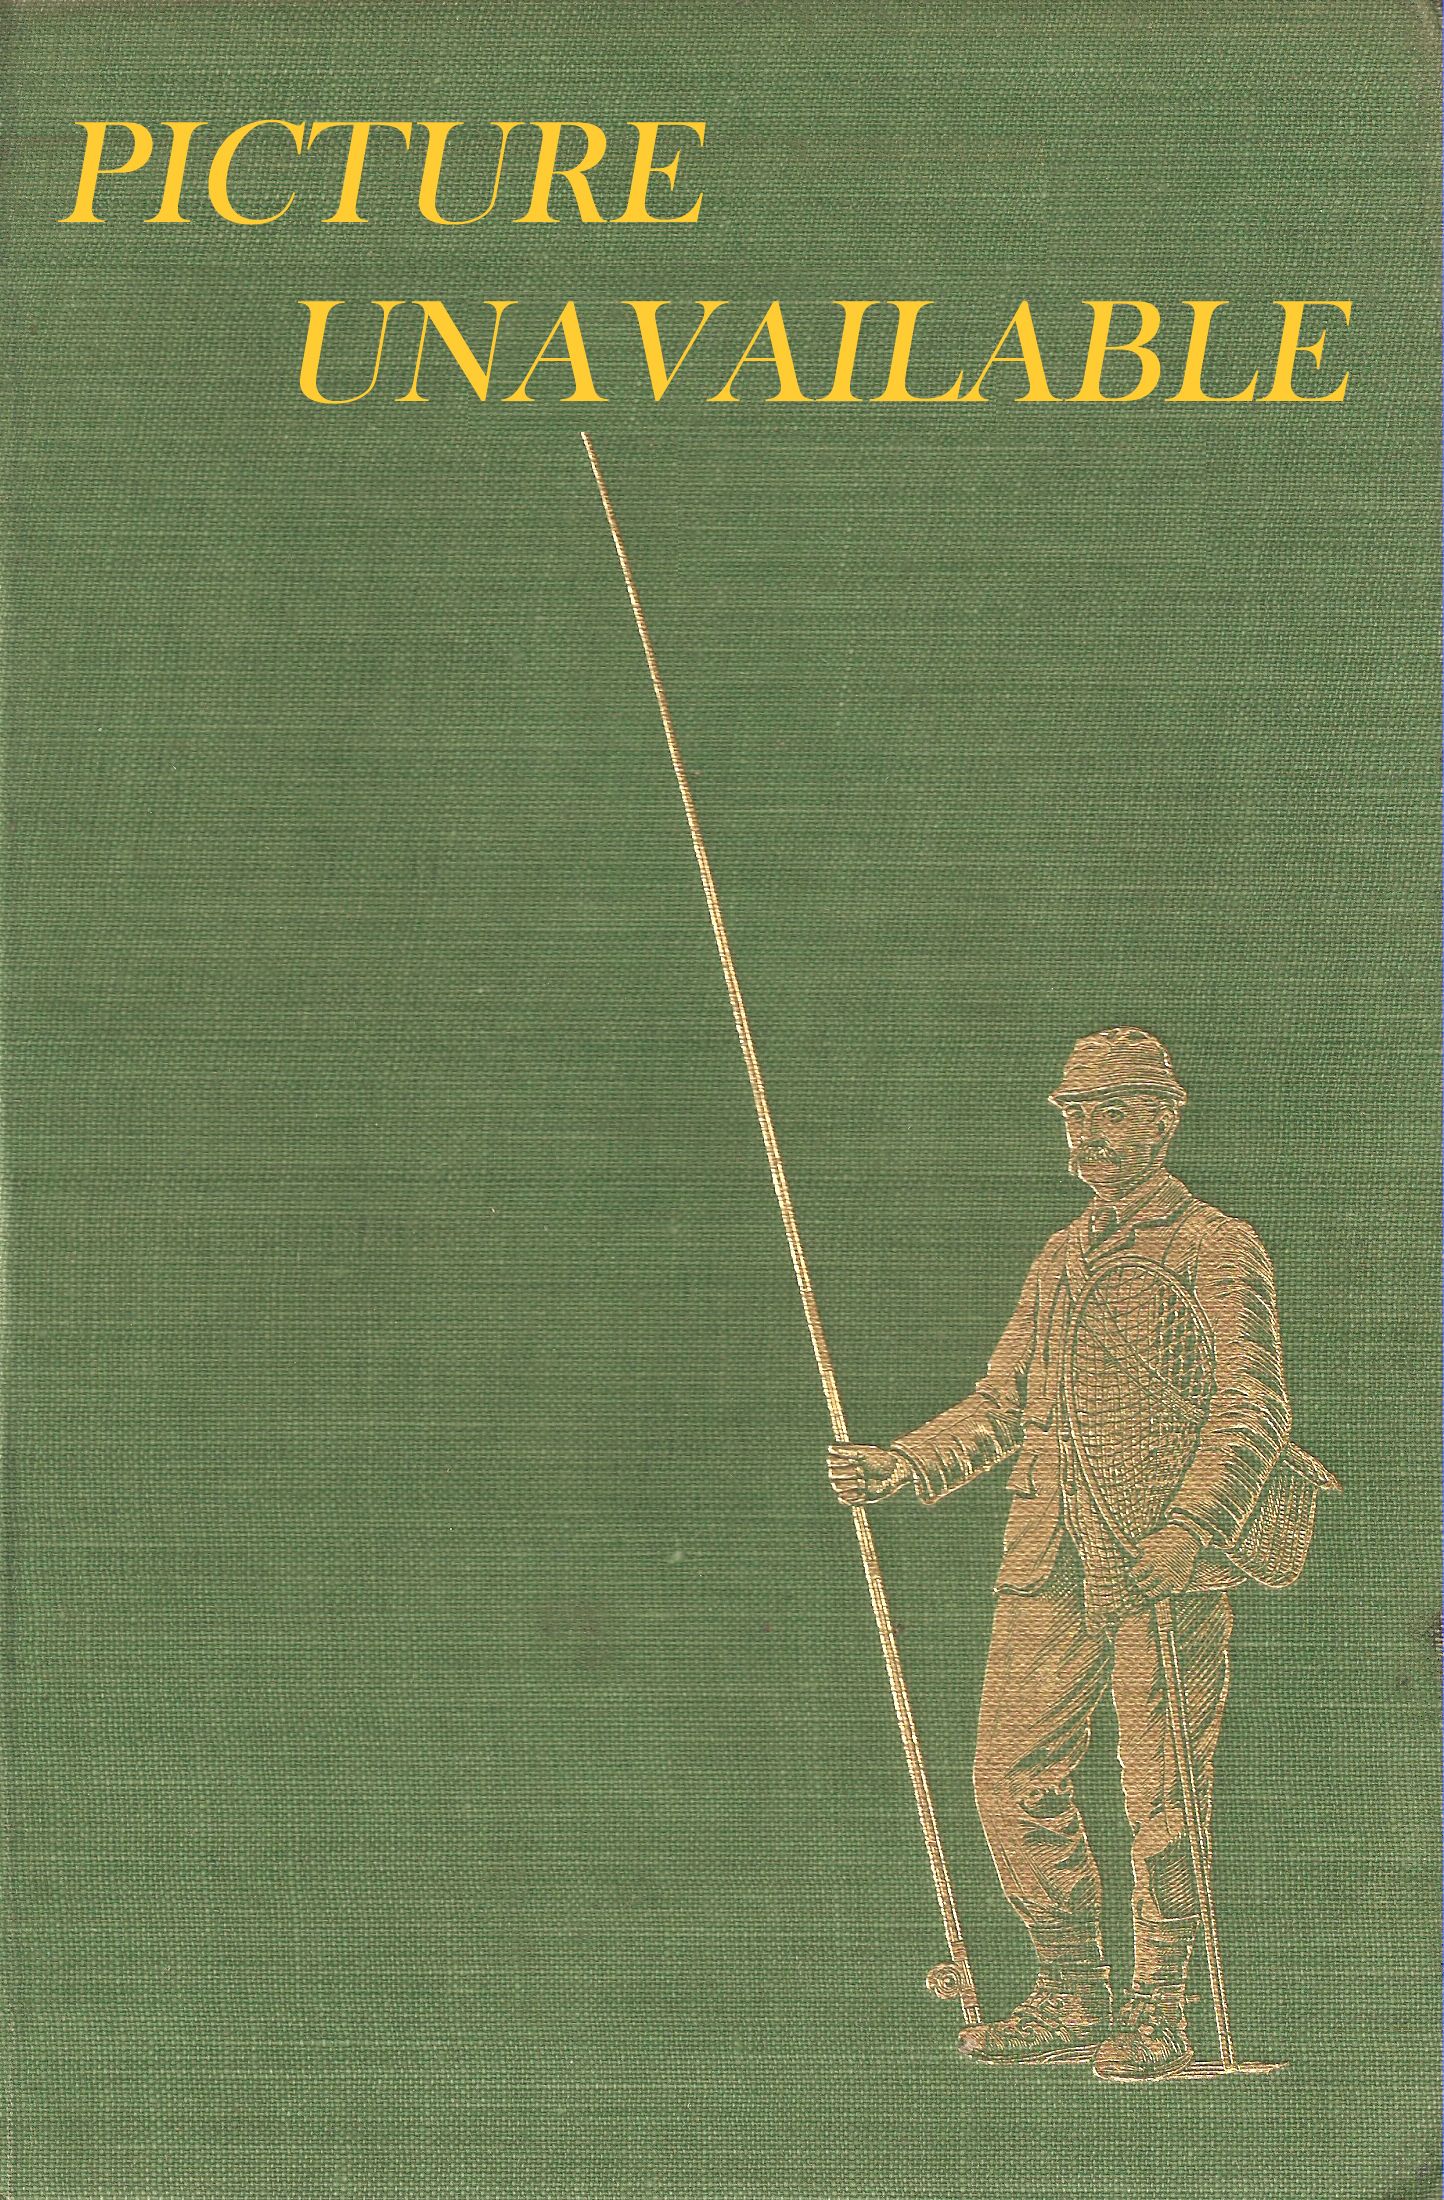 ALPHABET OF ANGLING, FOR THE USE OF BEGINNERS. By James Rennie, M.A.